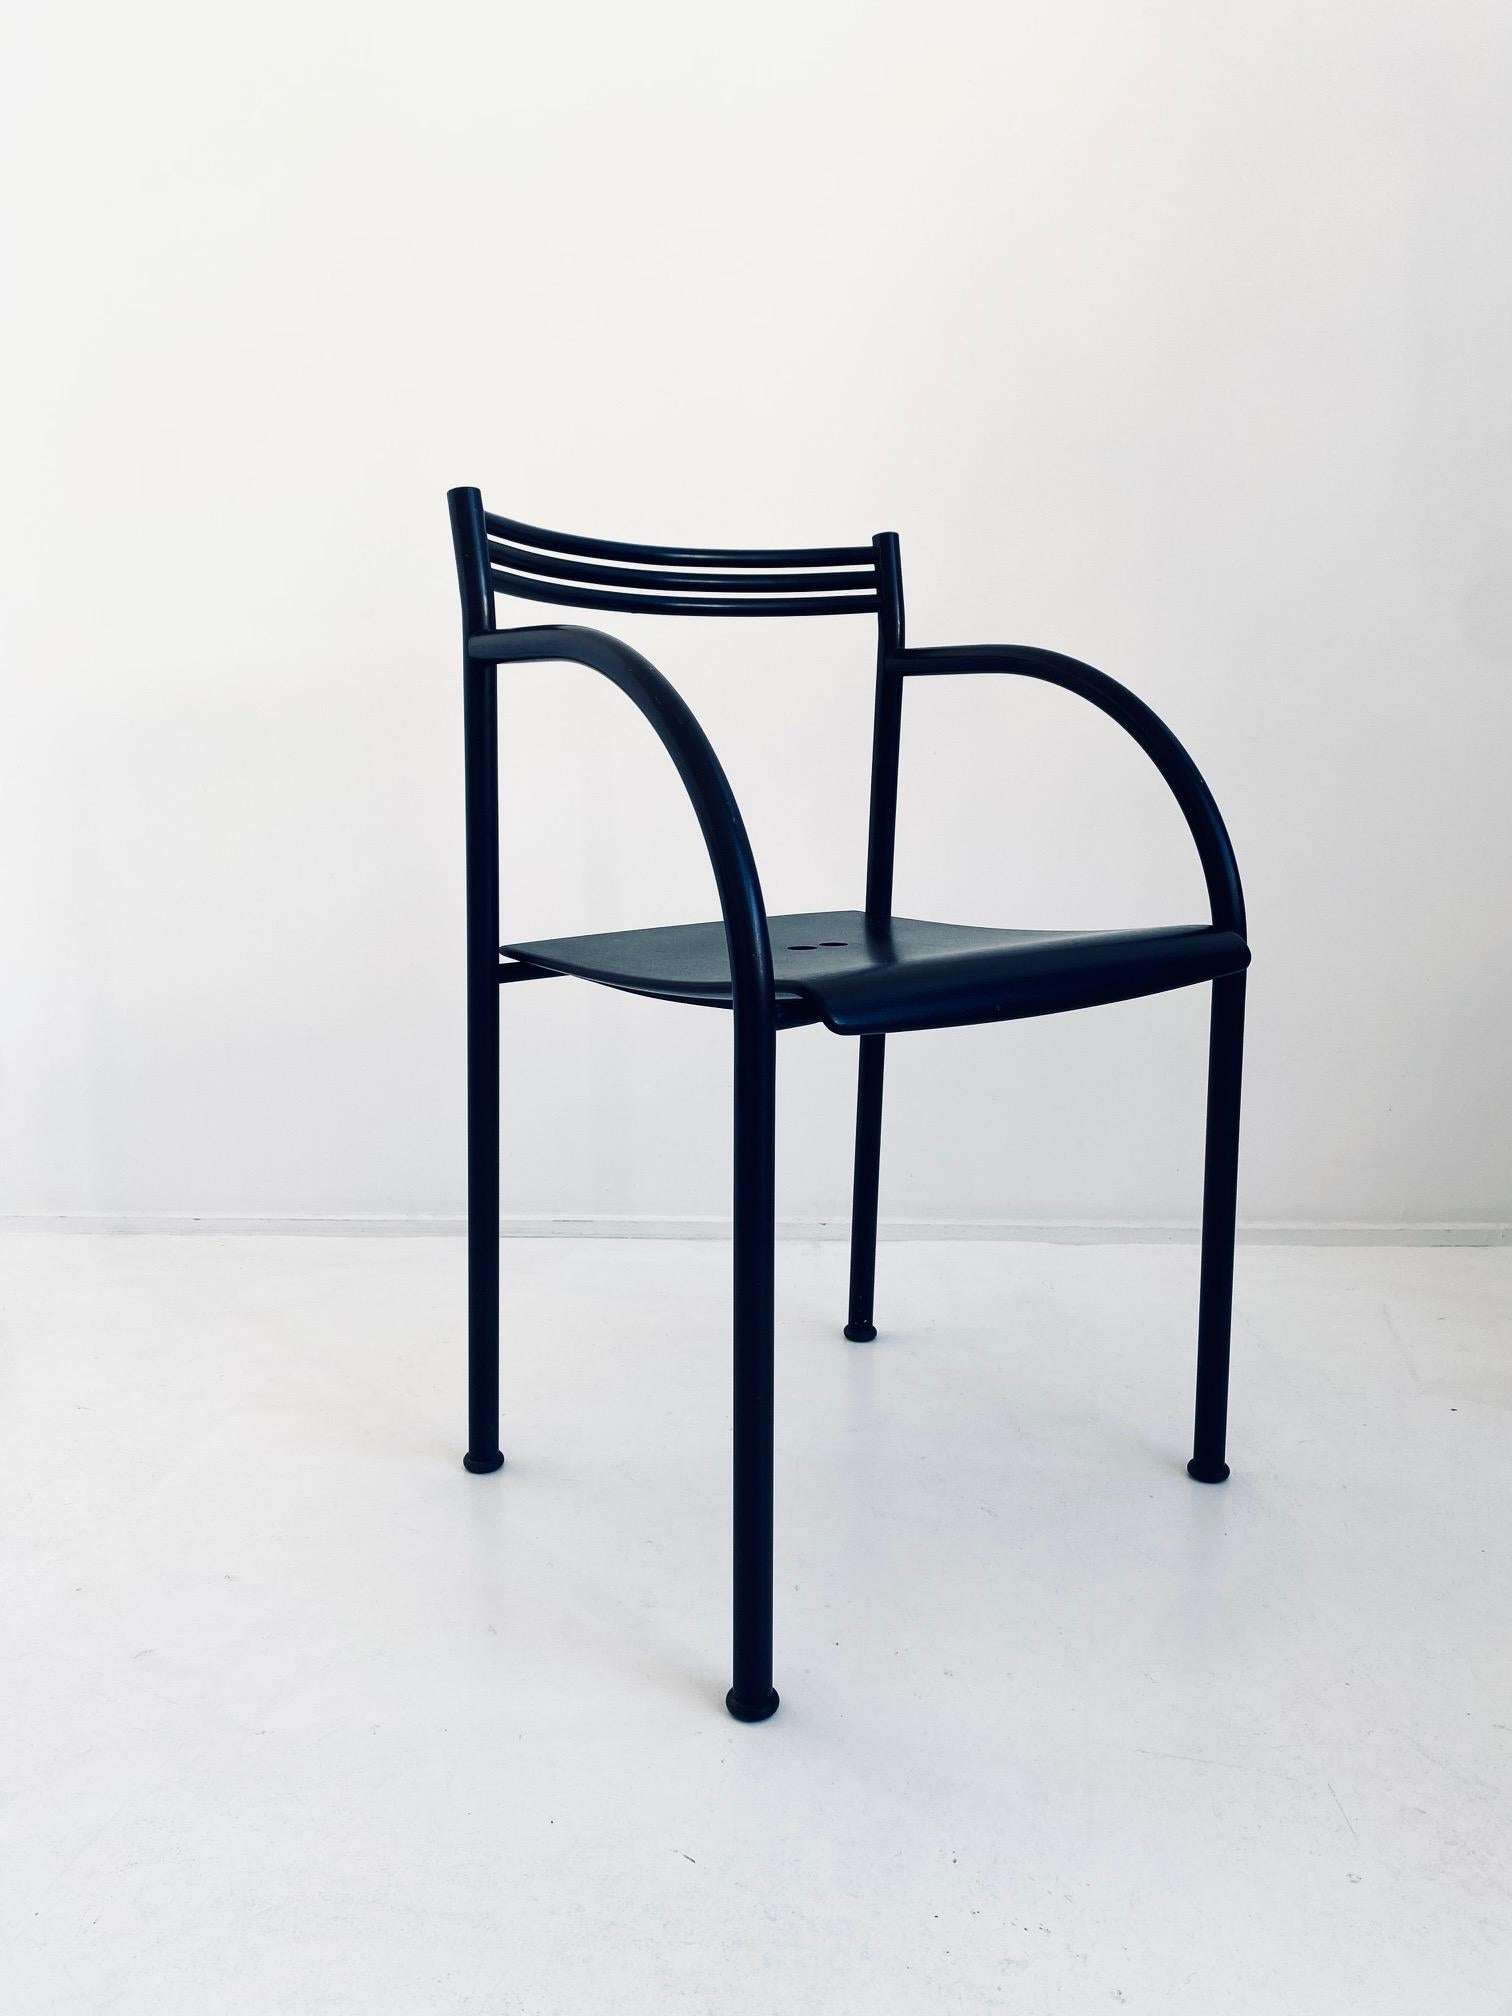 Black coated metal frame with plastic seating.

Beautiful original condition, with some very minor flaws consisting with age. Very small spots with coating loss.

These chairs are called 'Francesca Spanish' after a character in the novel called